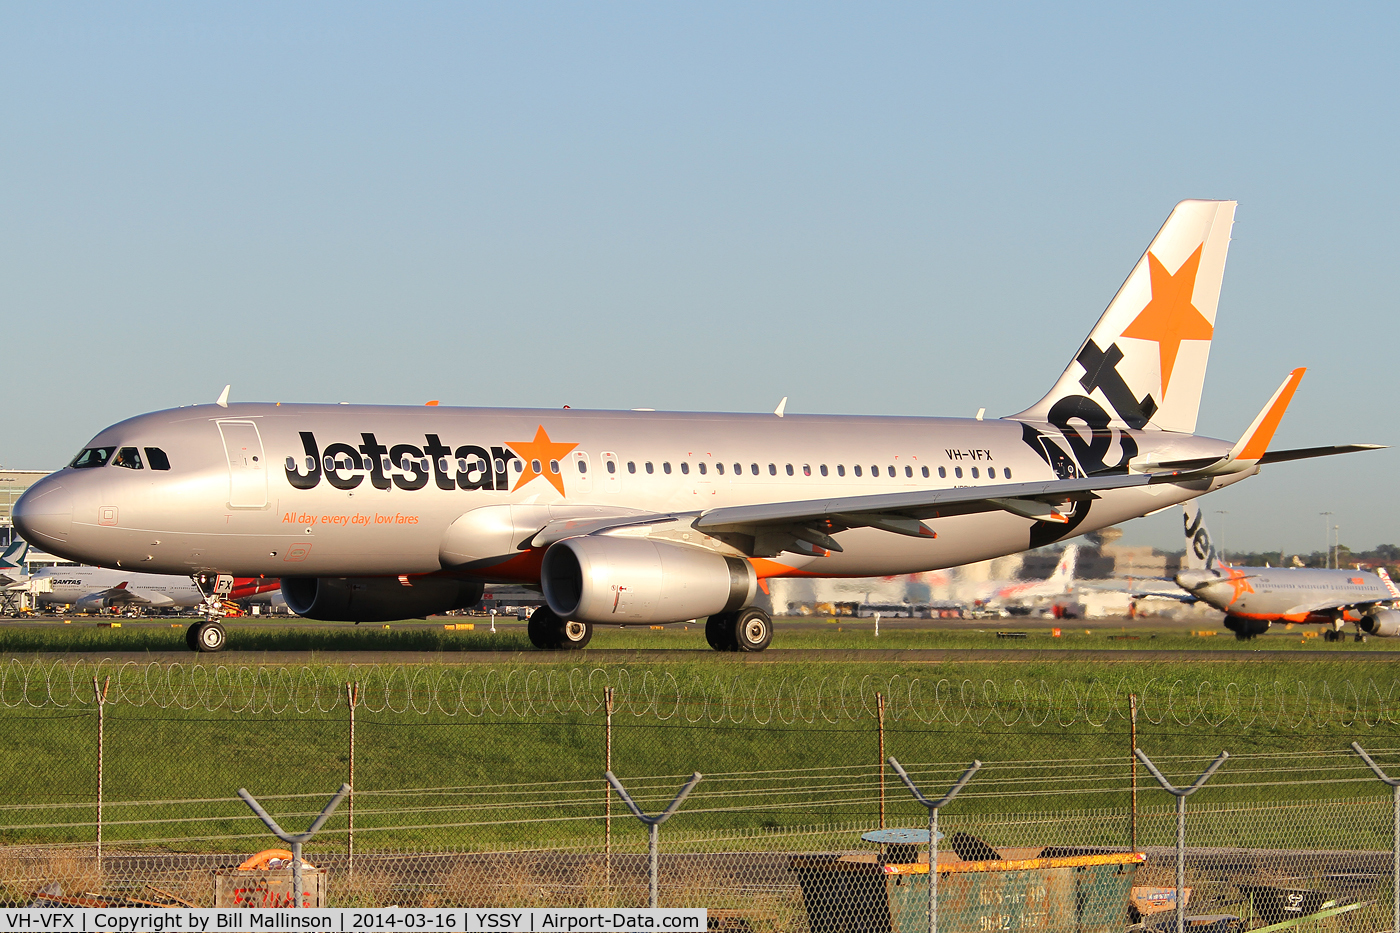 VH-VFX, 2013 Airbus A320-232 C/N 5871, taxiing to 34R